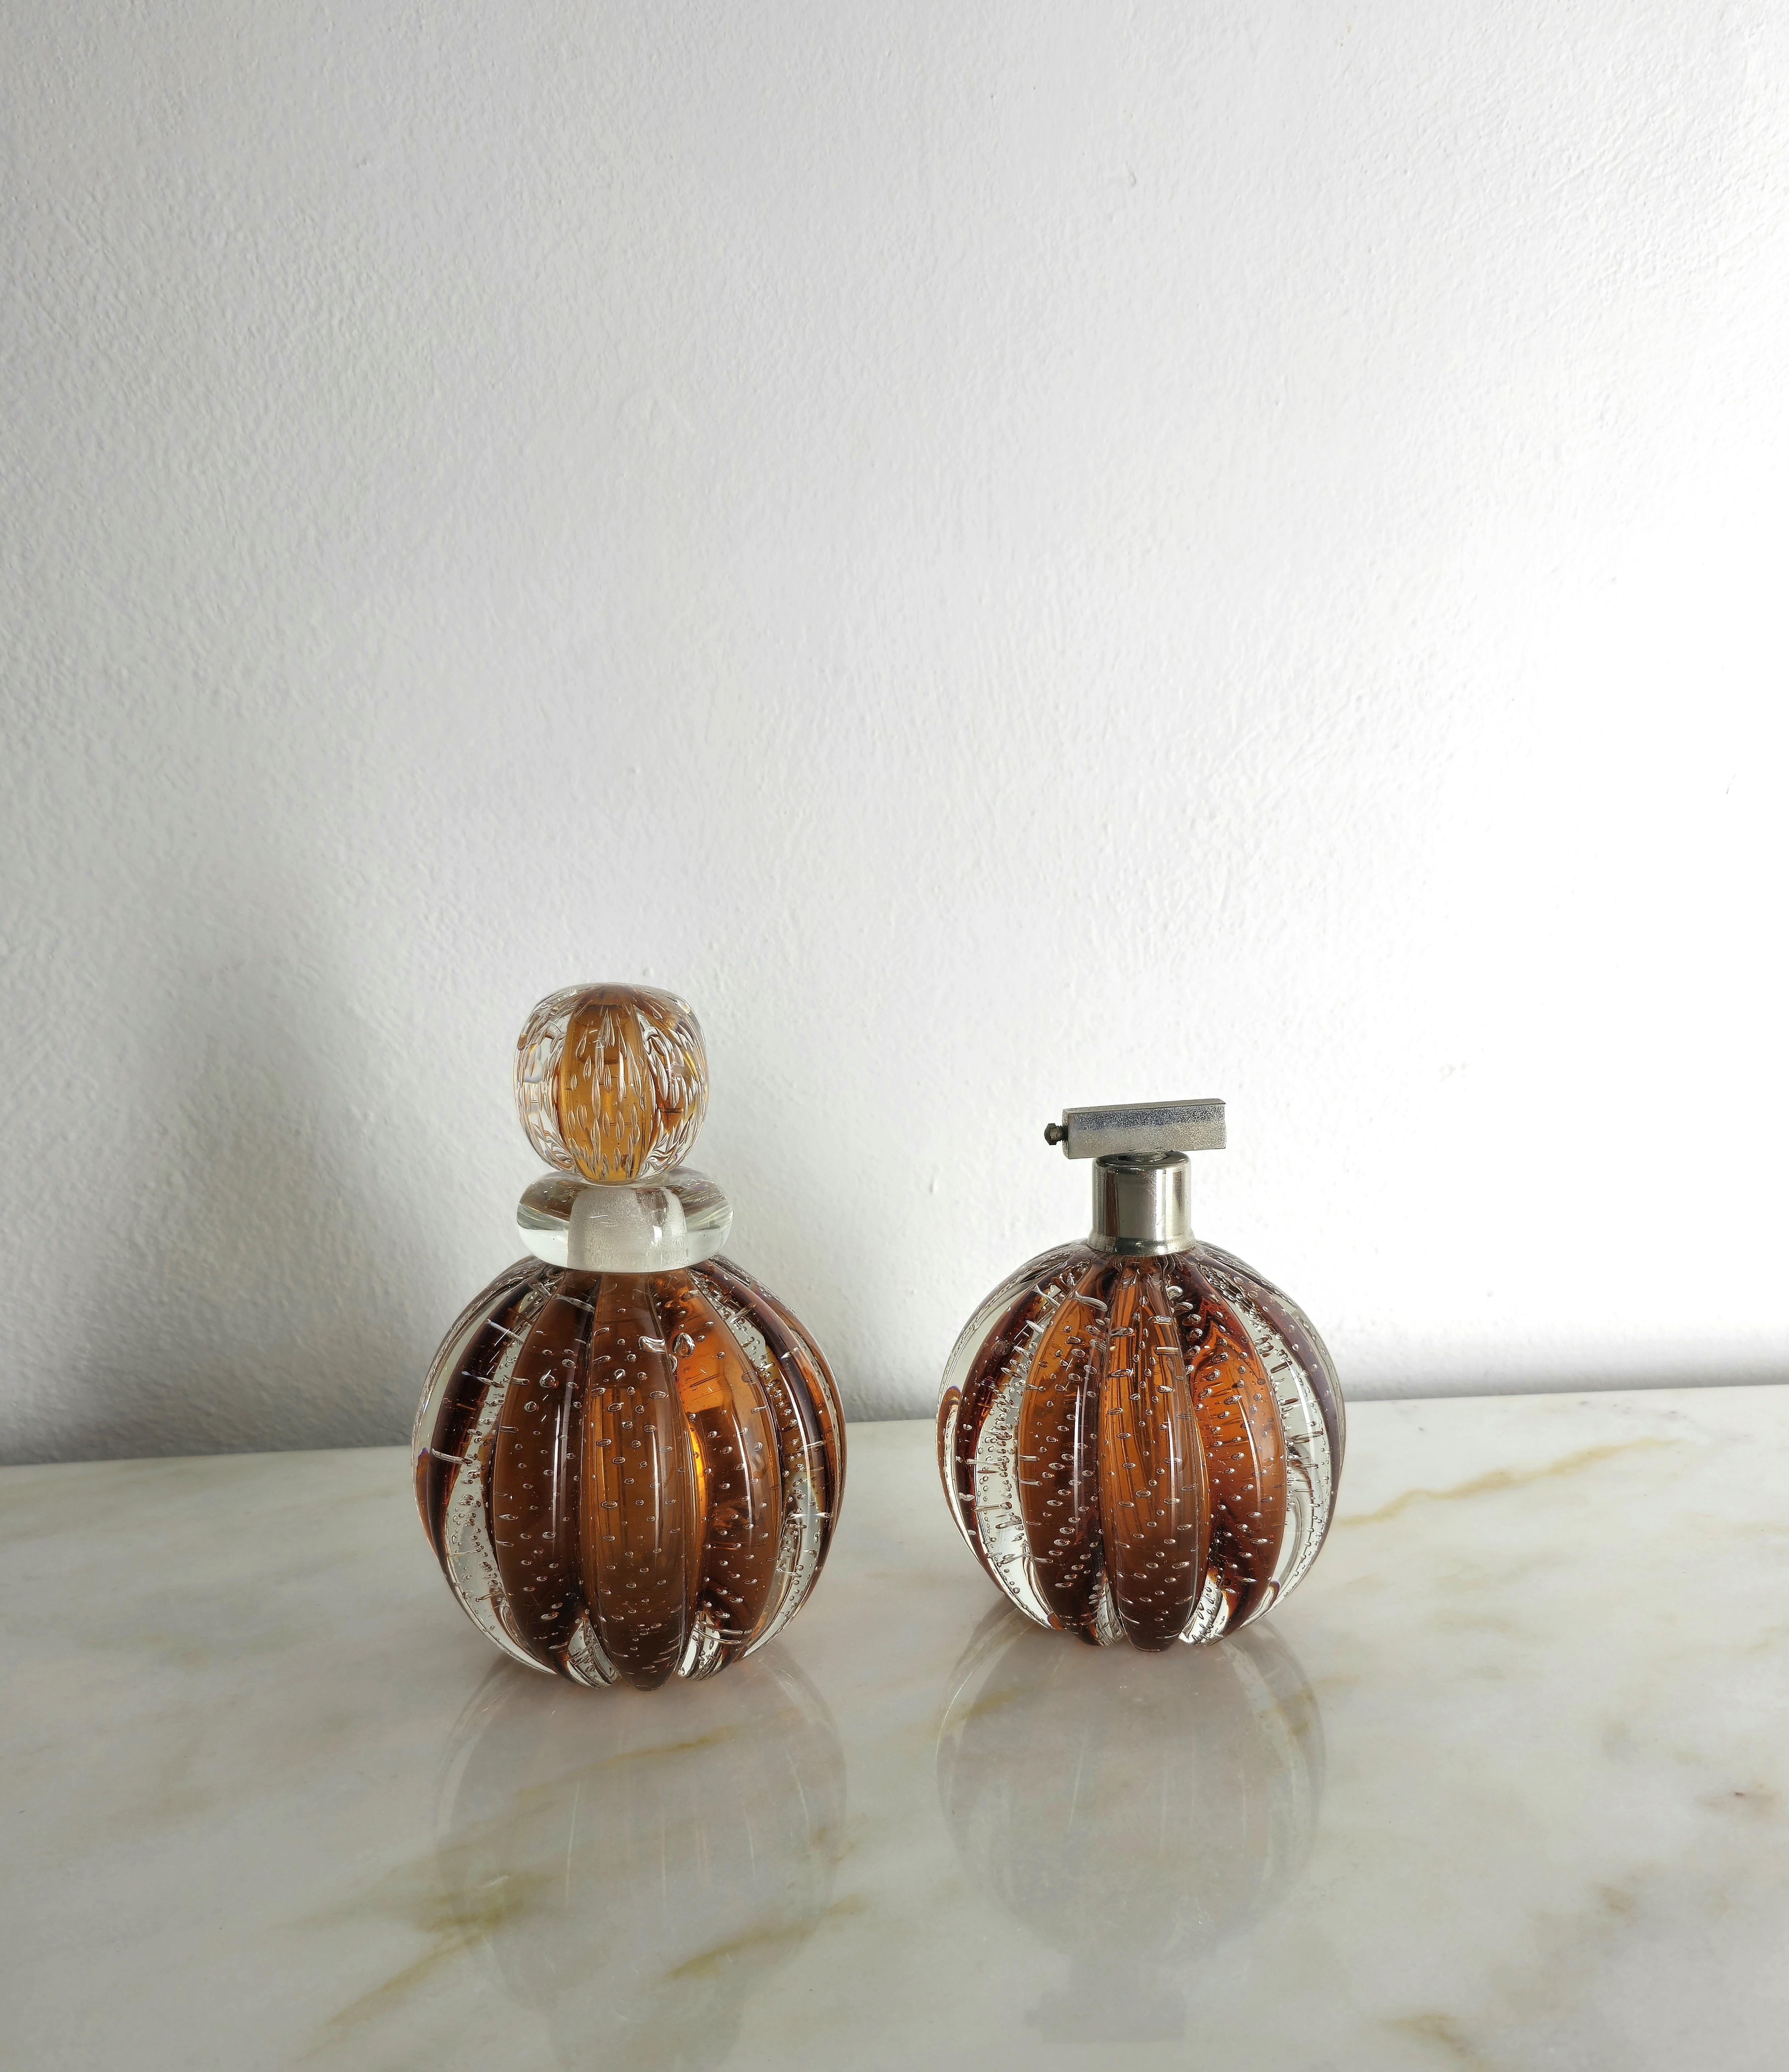 Decorative Object Toiletry Set Murano Glass Seguso Midcentury Italy 1950s For Sale 4